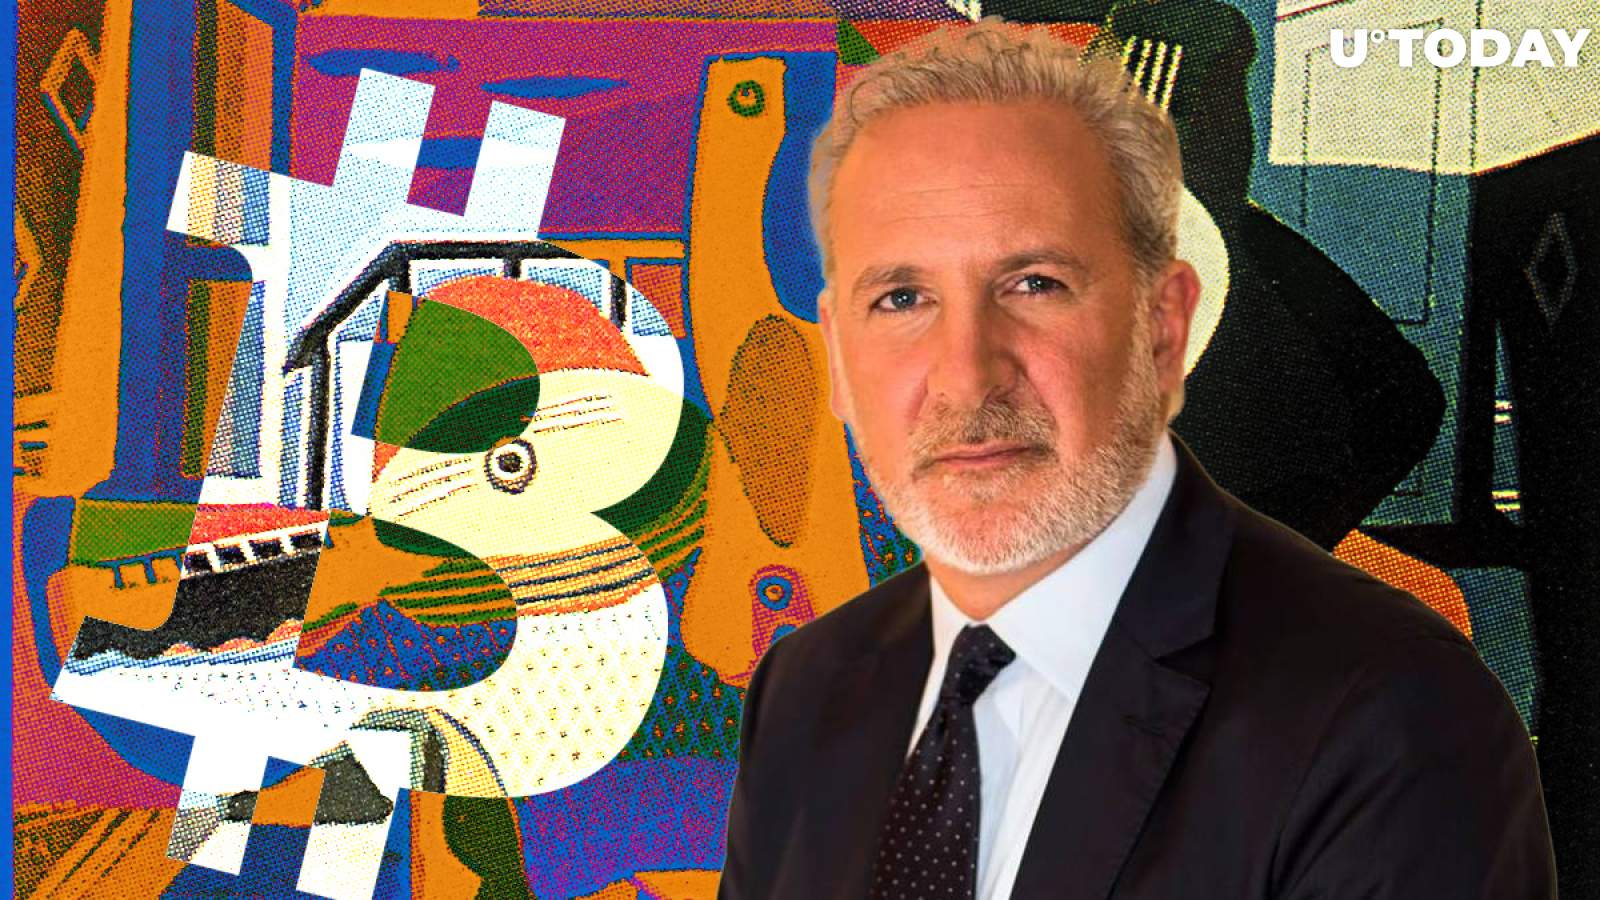 Peter Schiff Caught Defining Picasso Painting Can Be Used as Bitcoin